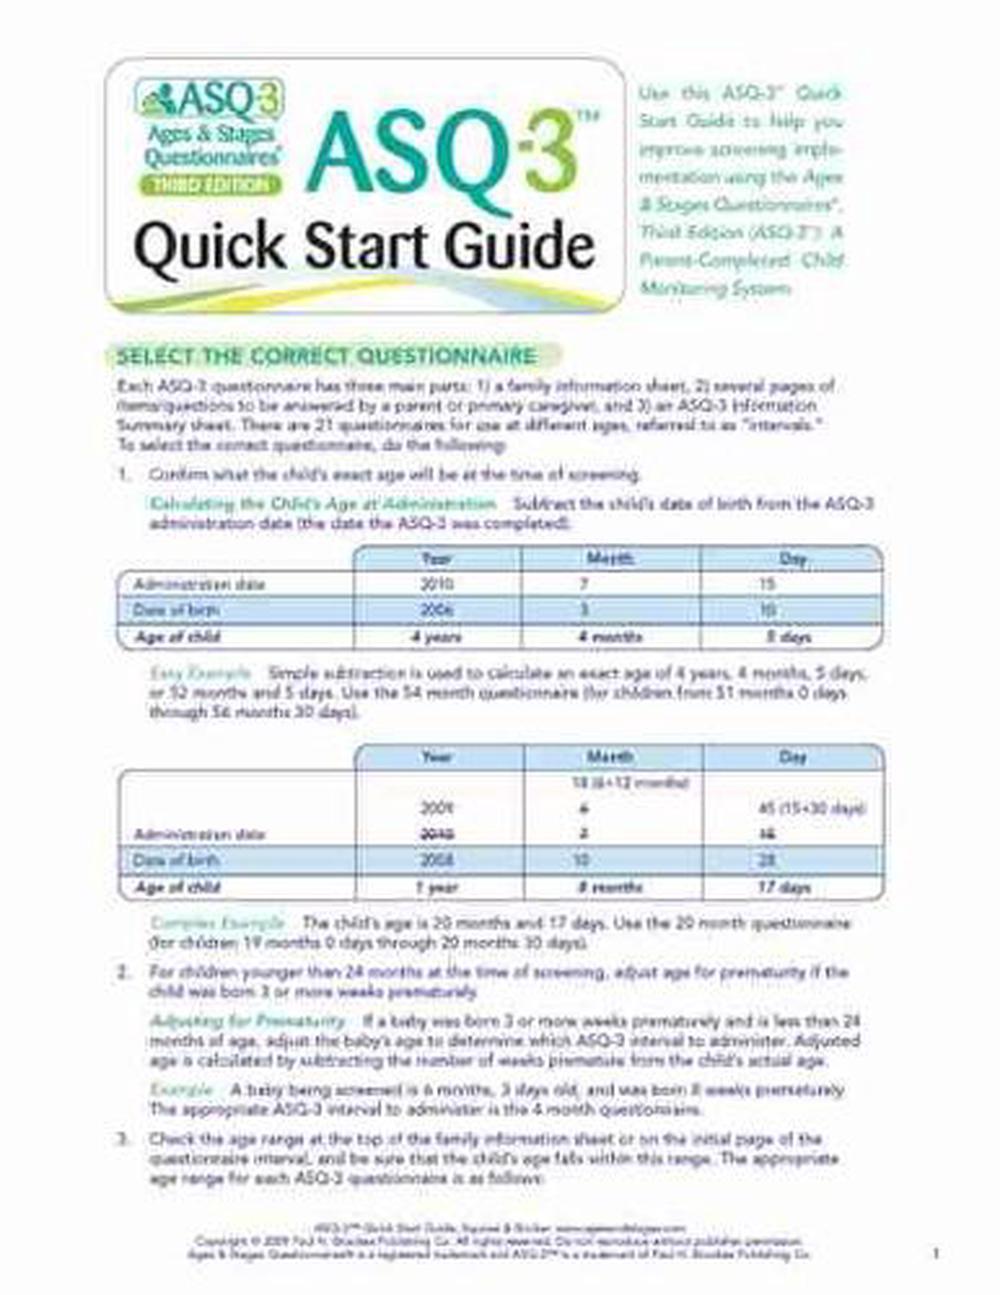 asq-3-quick-start-guide-ages-stages-questionnaires-by-jane-squires